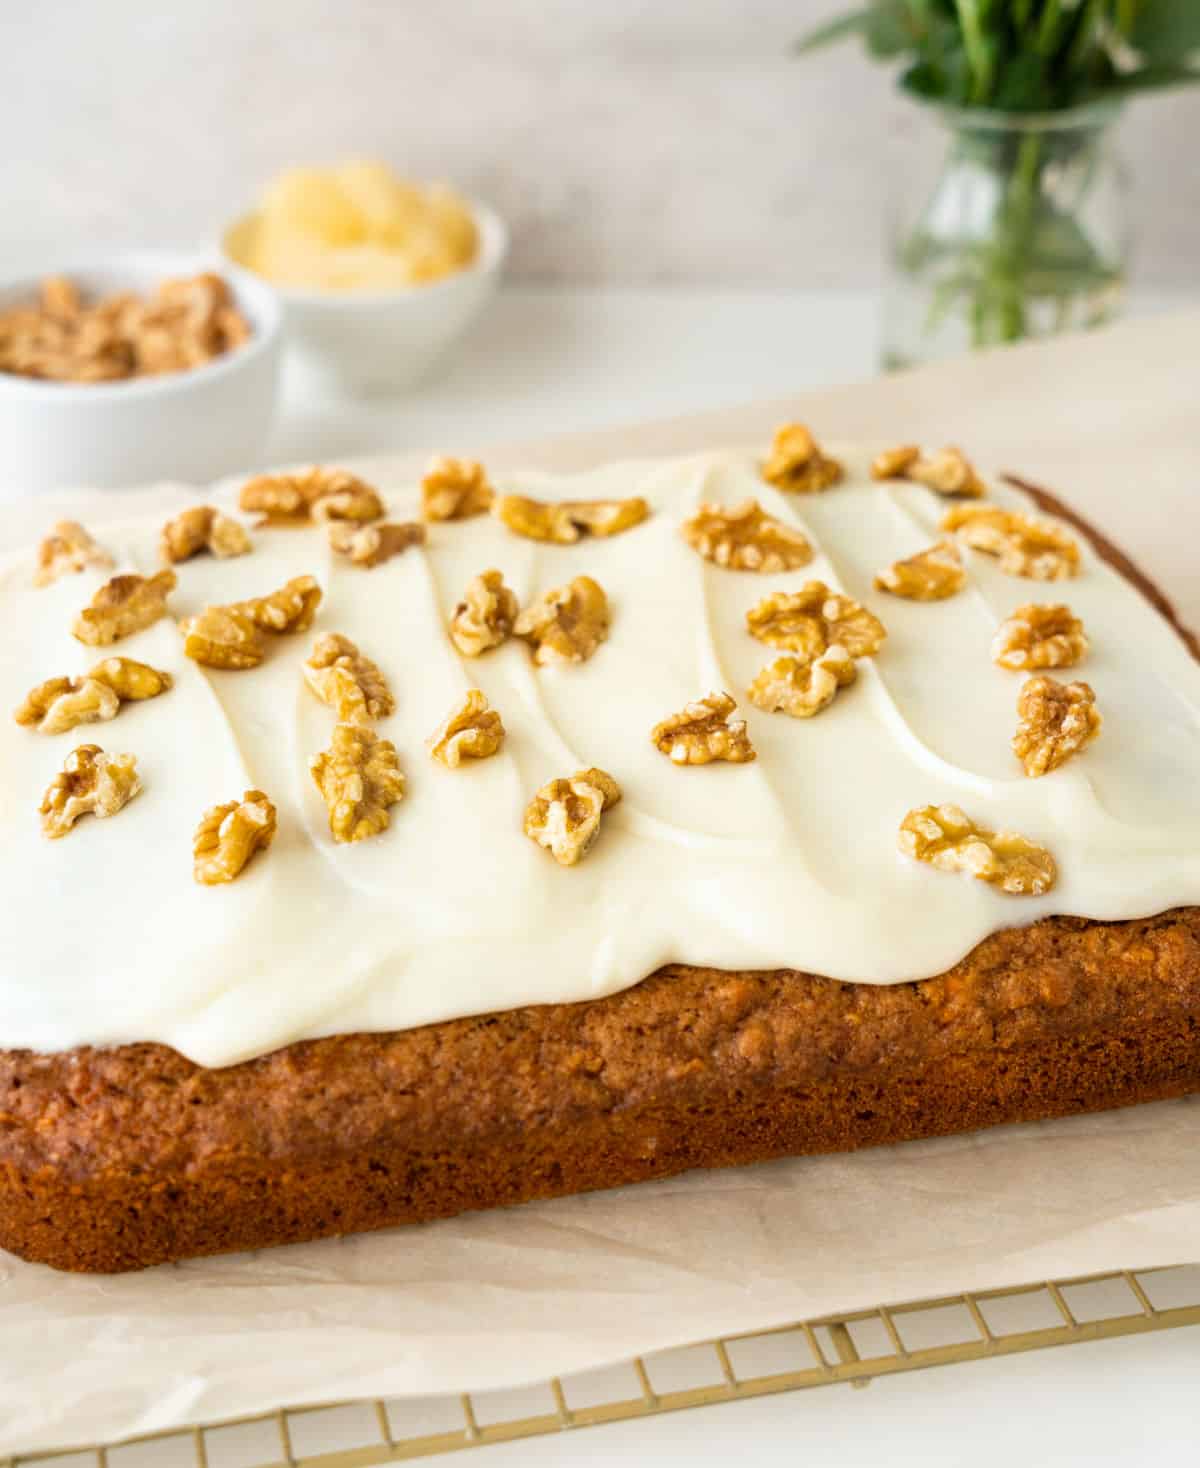 Frosted whole carrot sheet cake on a beige paper with bowl and ingredients on a grey background.